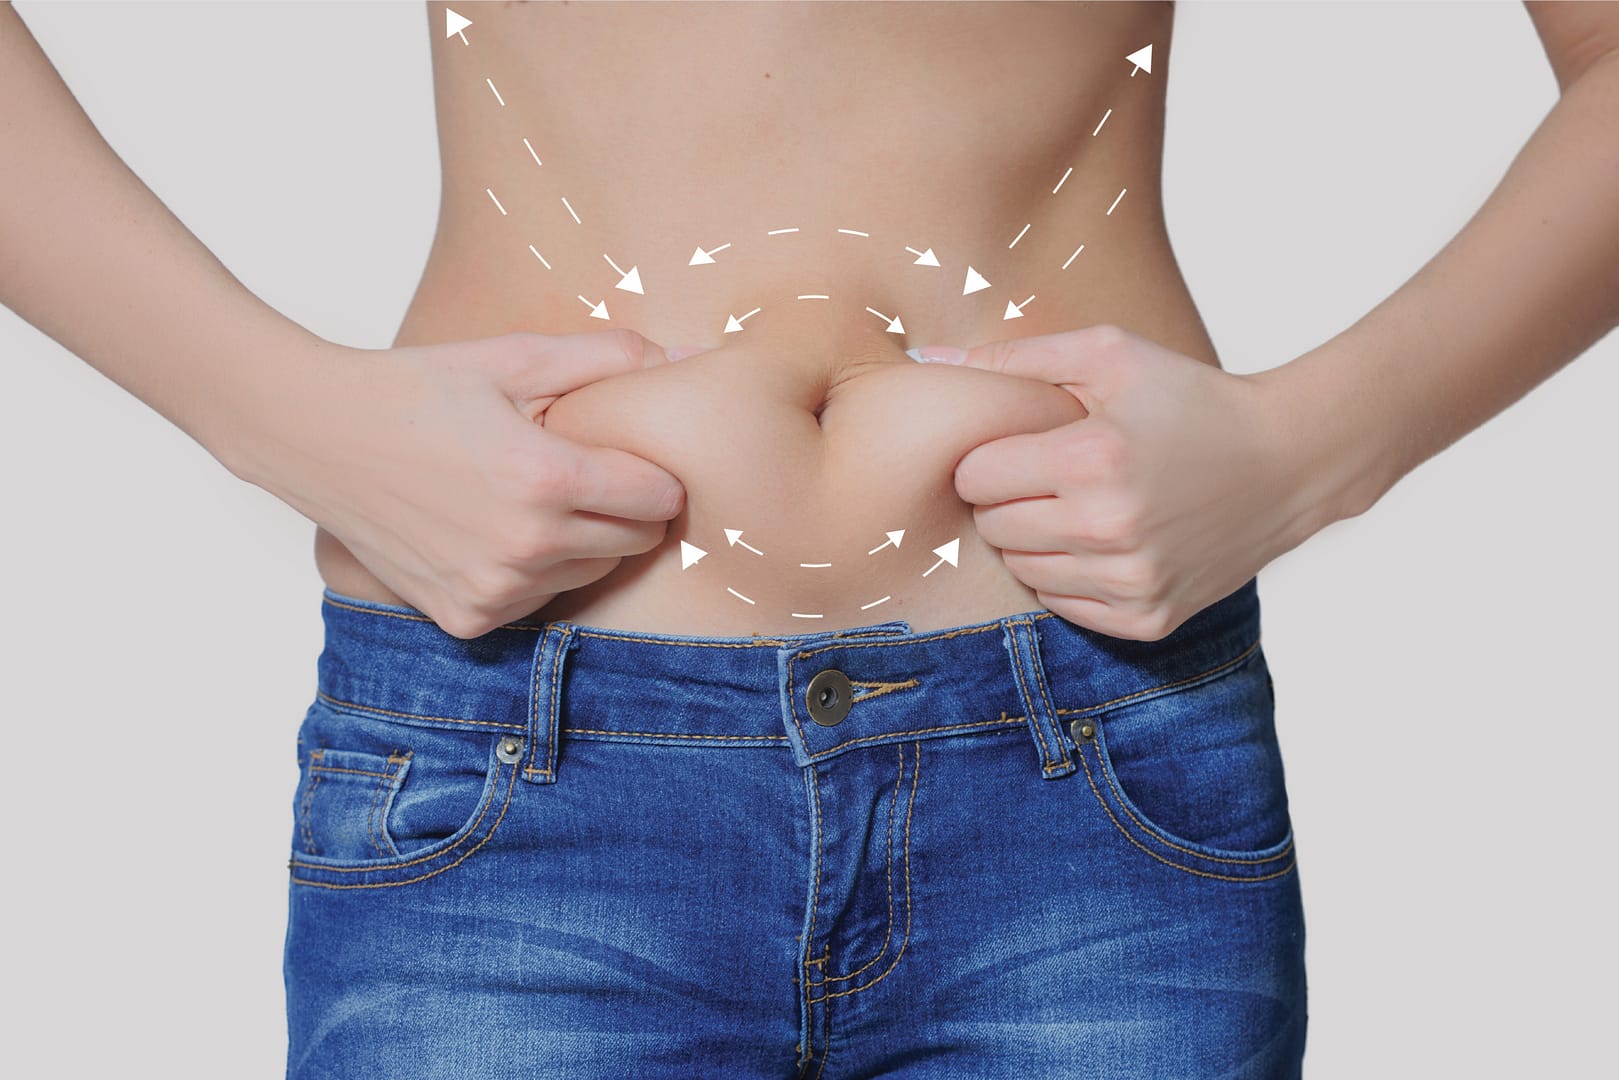 Smart Lipo NJ: What to Expect & Recovery Tips from a Top Doctor